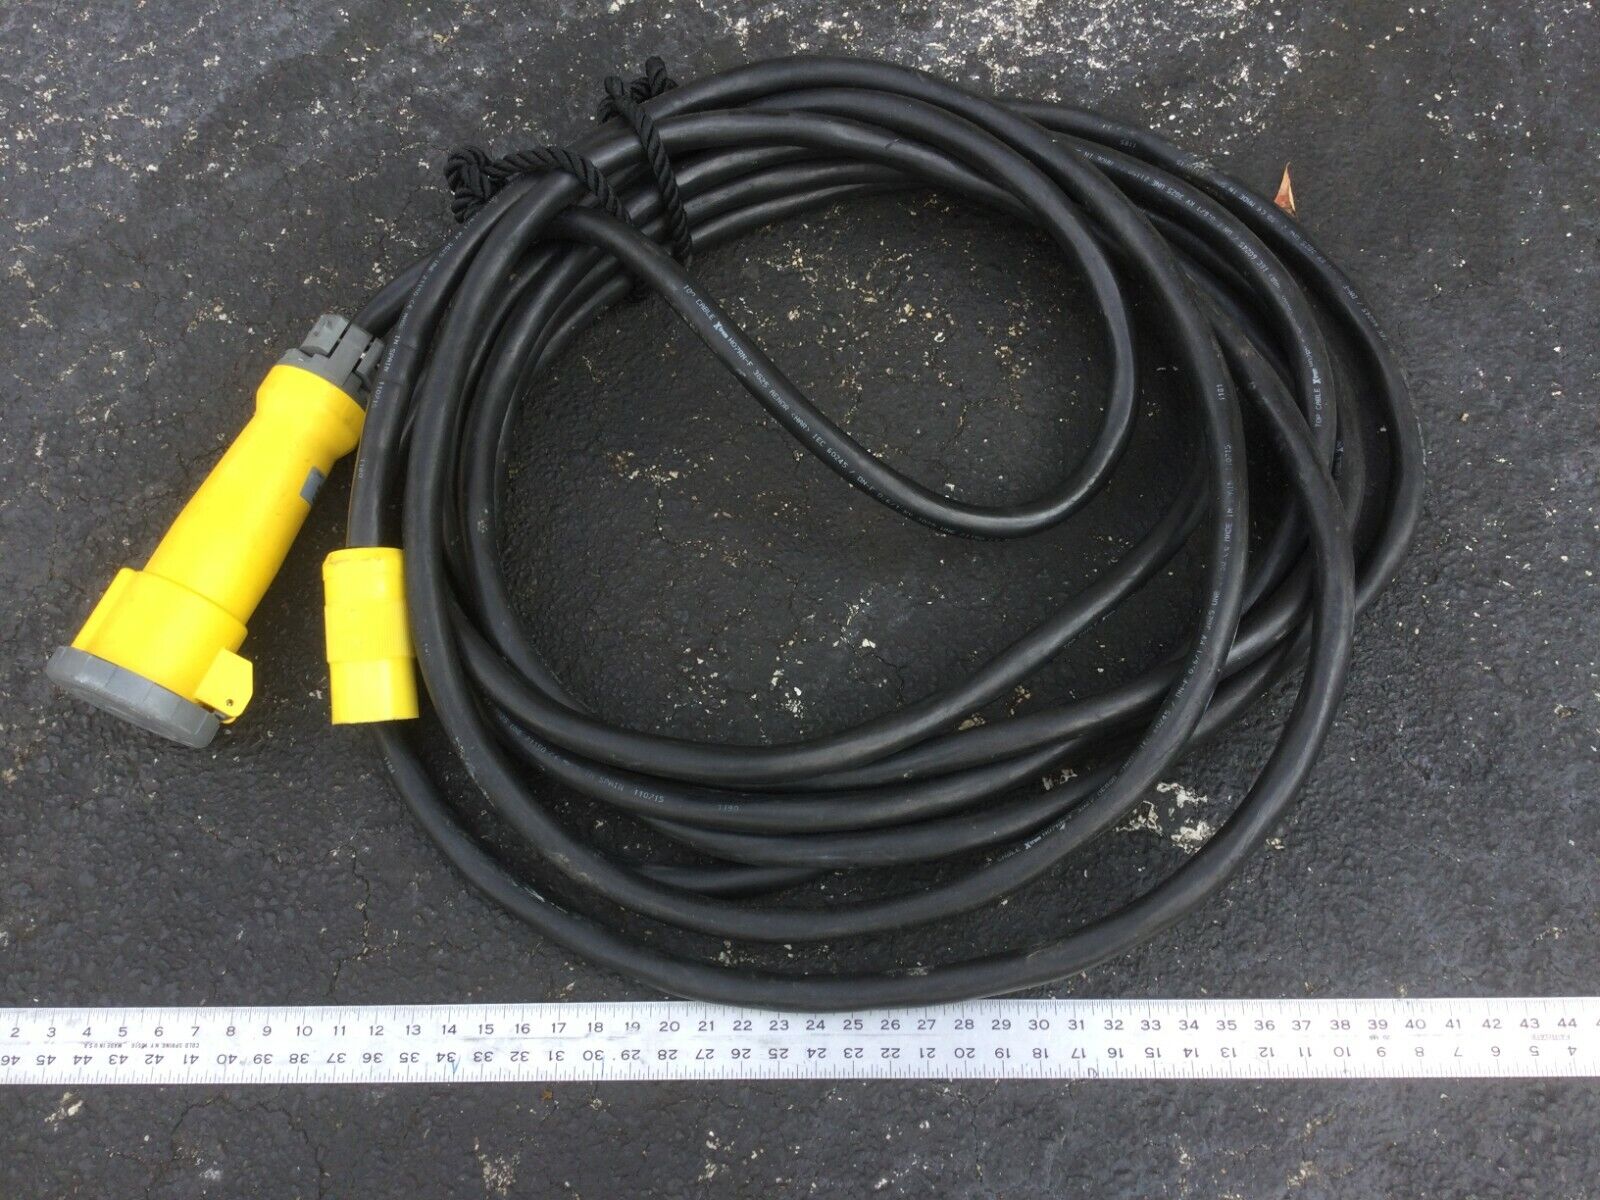 Marine Power Cable w/Hubbell Plugs - aprox 30 Feet